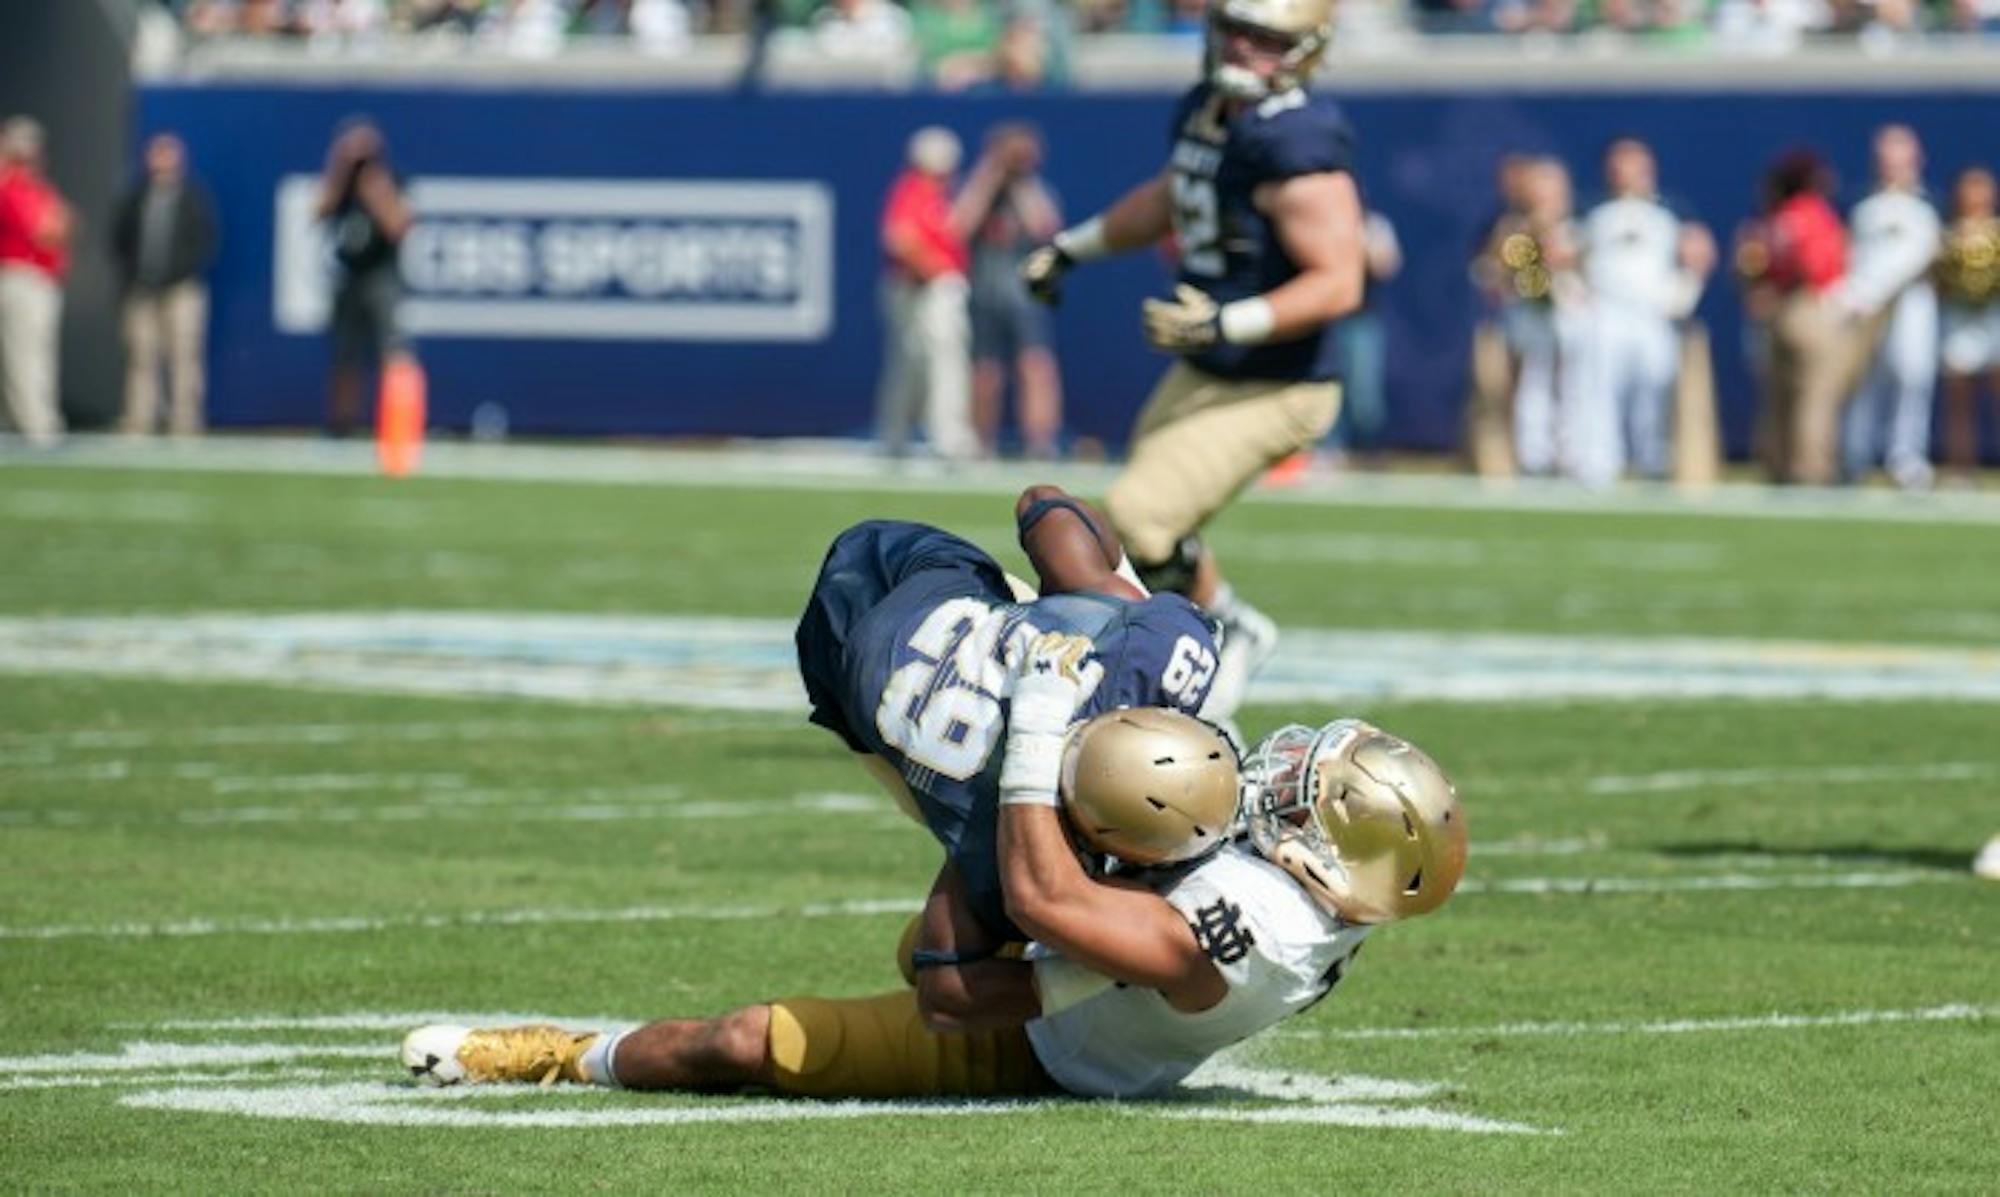 Irish junior Greer Martini tackles the Navy ball carrier behind the line of scrimmage during Notre Dame's 28-27 loss to Navy on Saturday. Martini had 11 total tackles in the game.